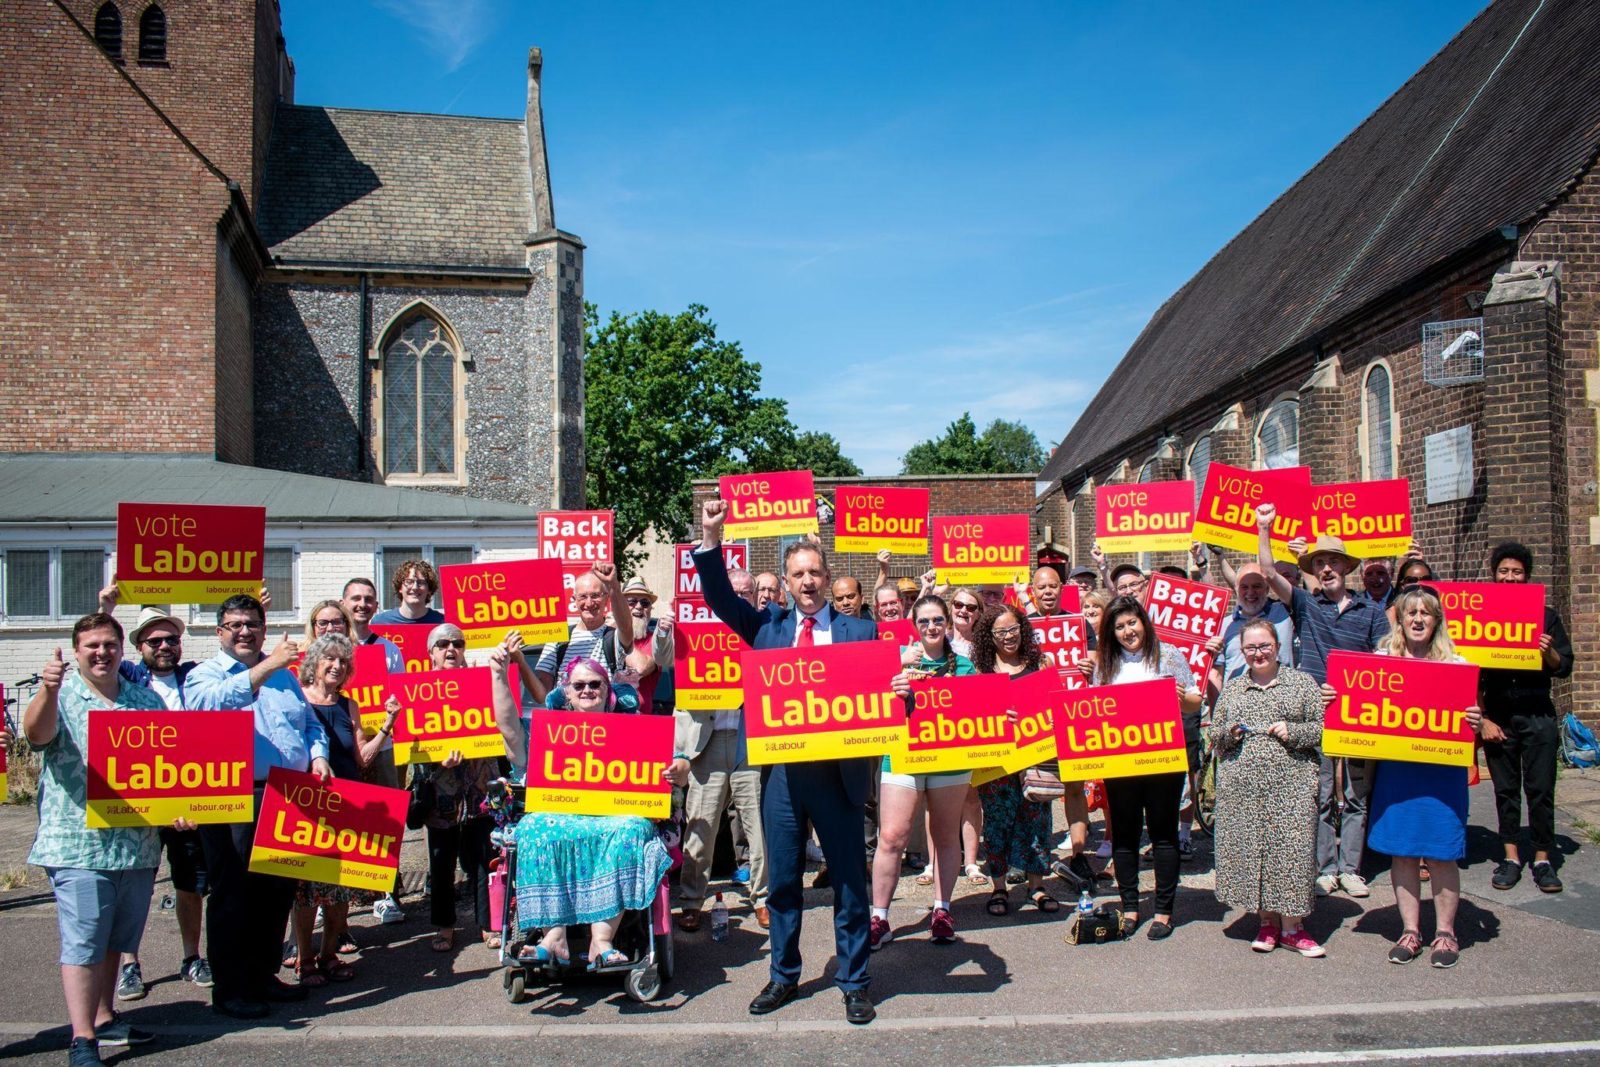 A group of campaigners with parliamentary candidate Matt Turmaine